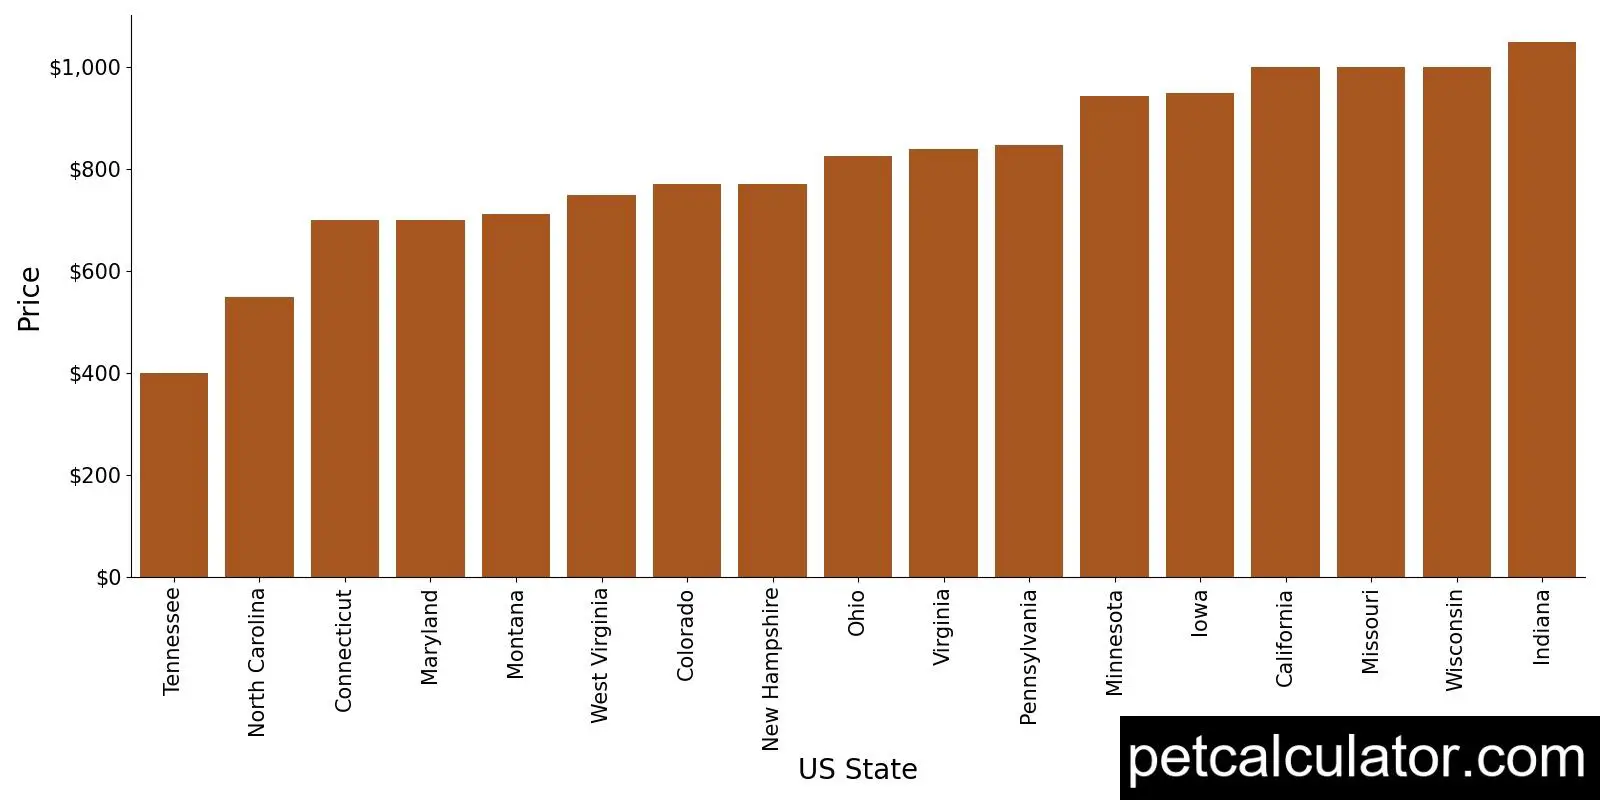 Price of Norwegian Elkhound by US State 